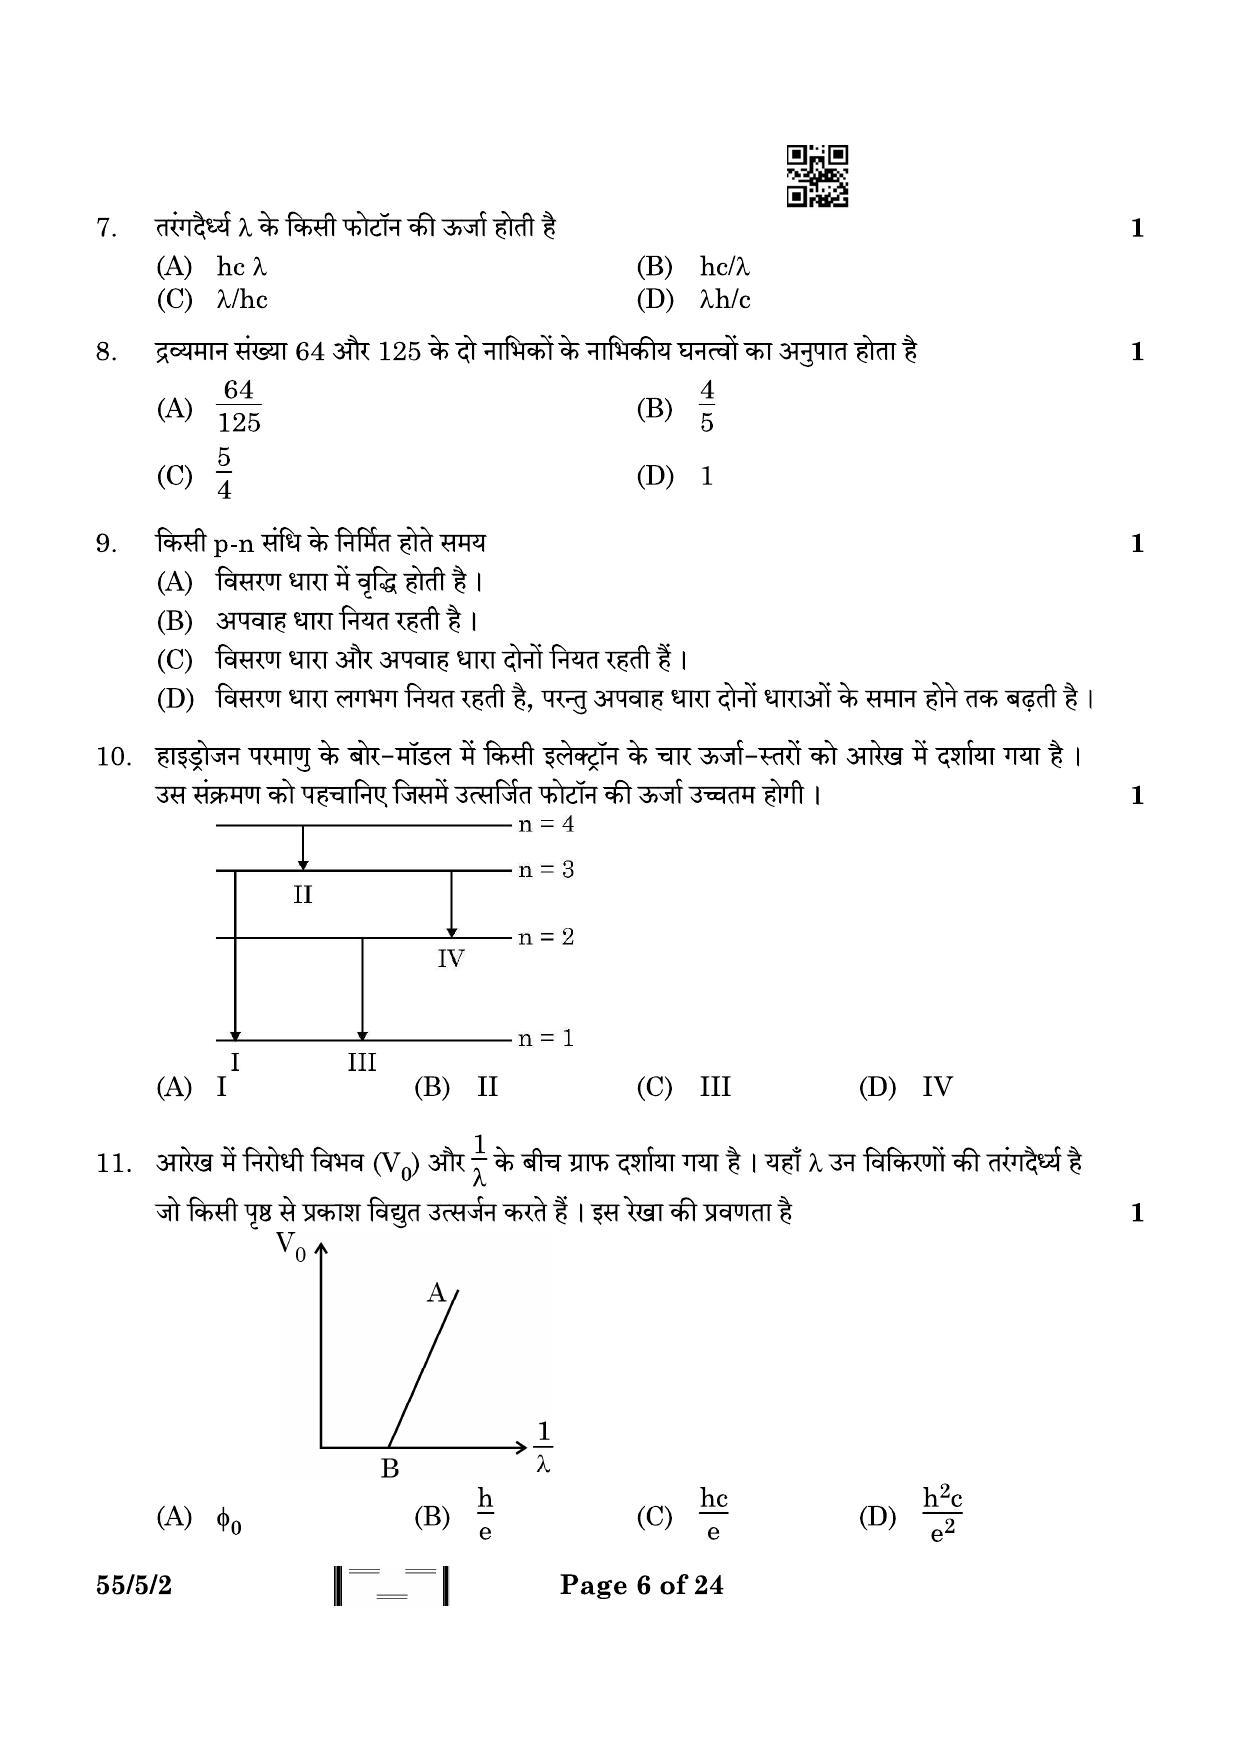 CBSE Class 12 55-5-2 Physics 2023 Question Paper - Page 6